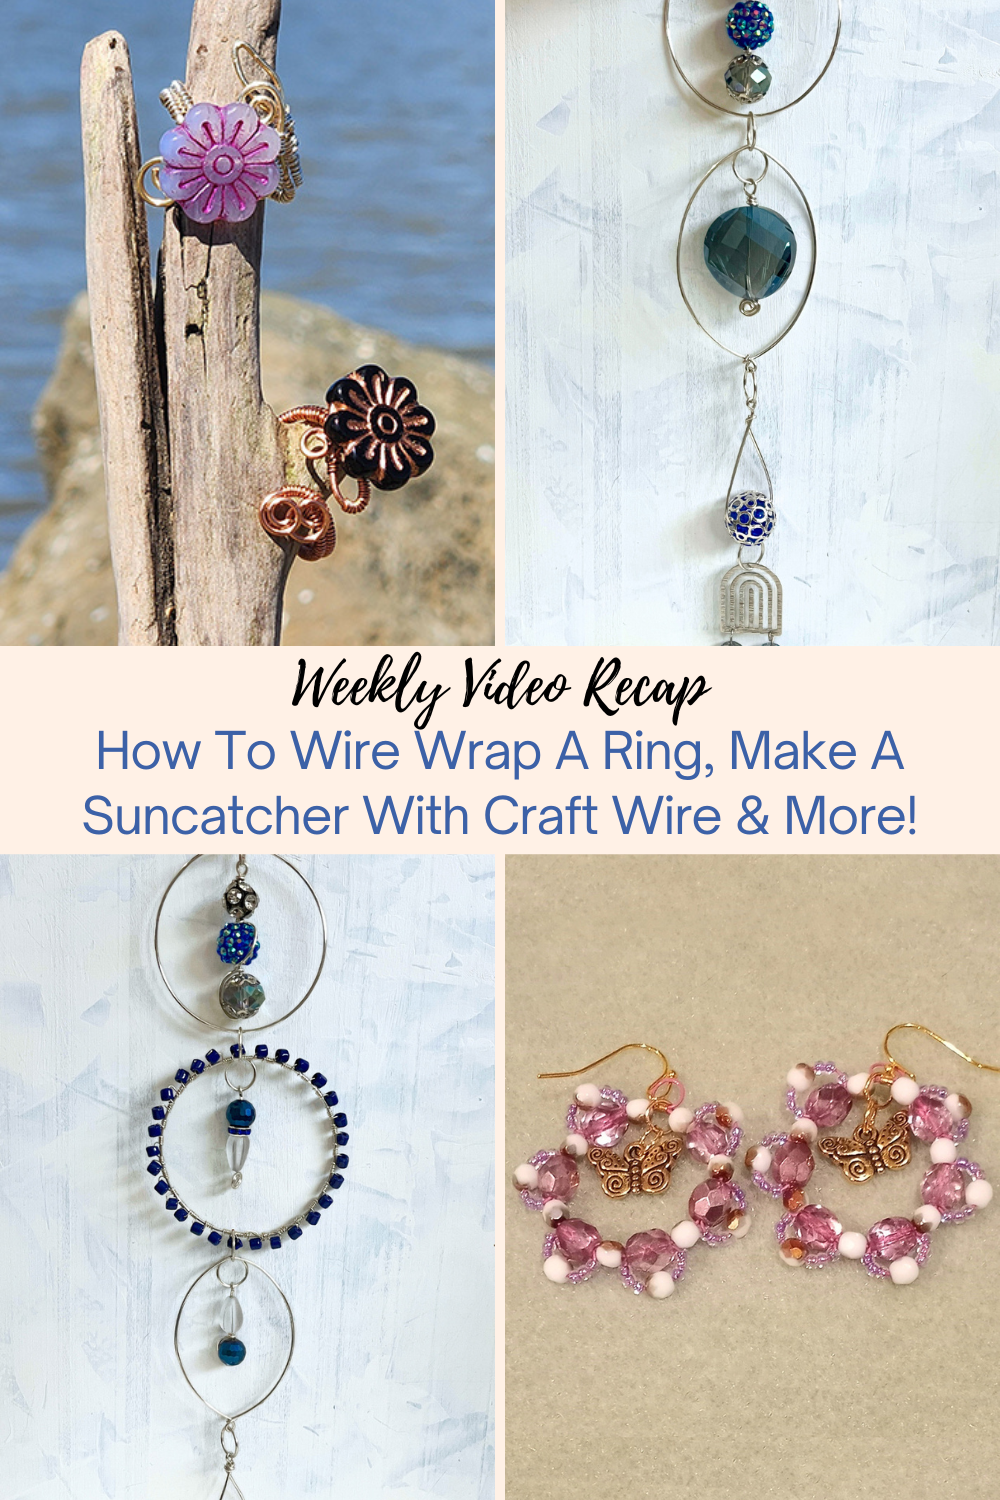 How To Wire Wrap A Ring, Make A Suncatcher With Craft Wire & More! Collage